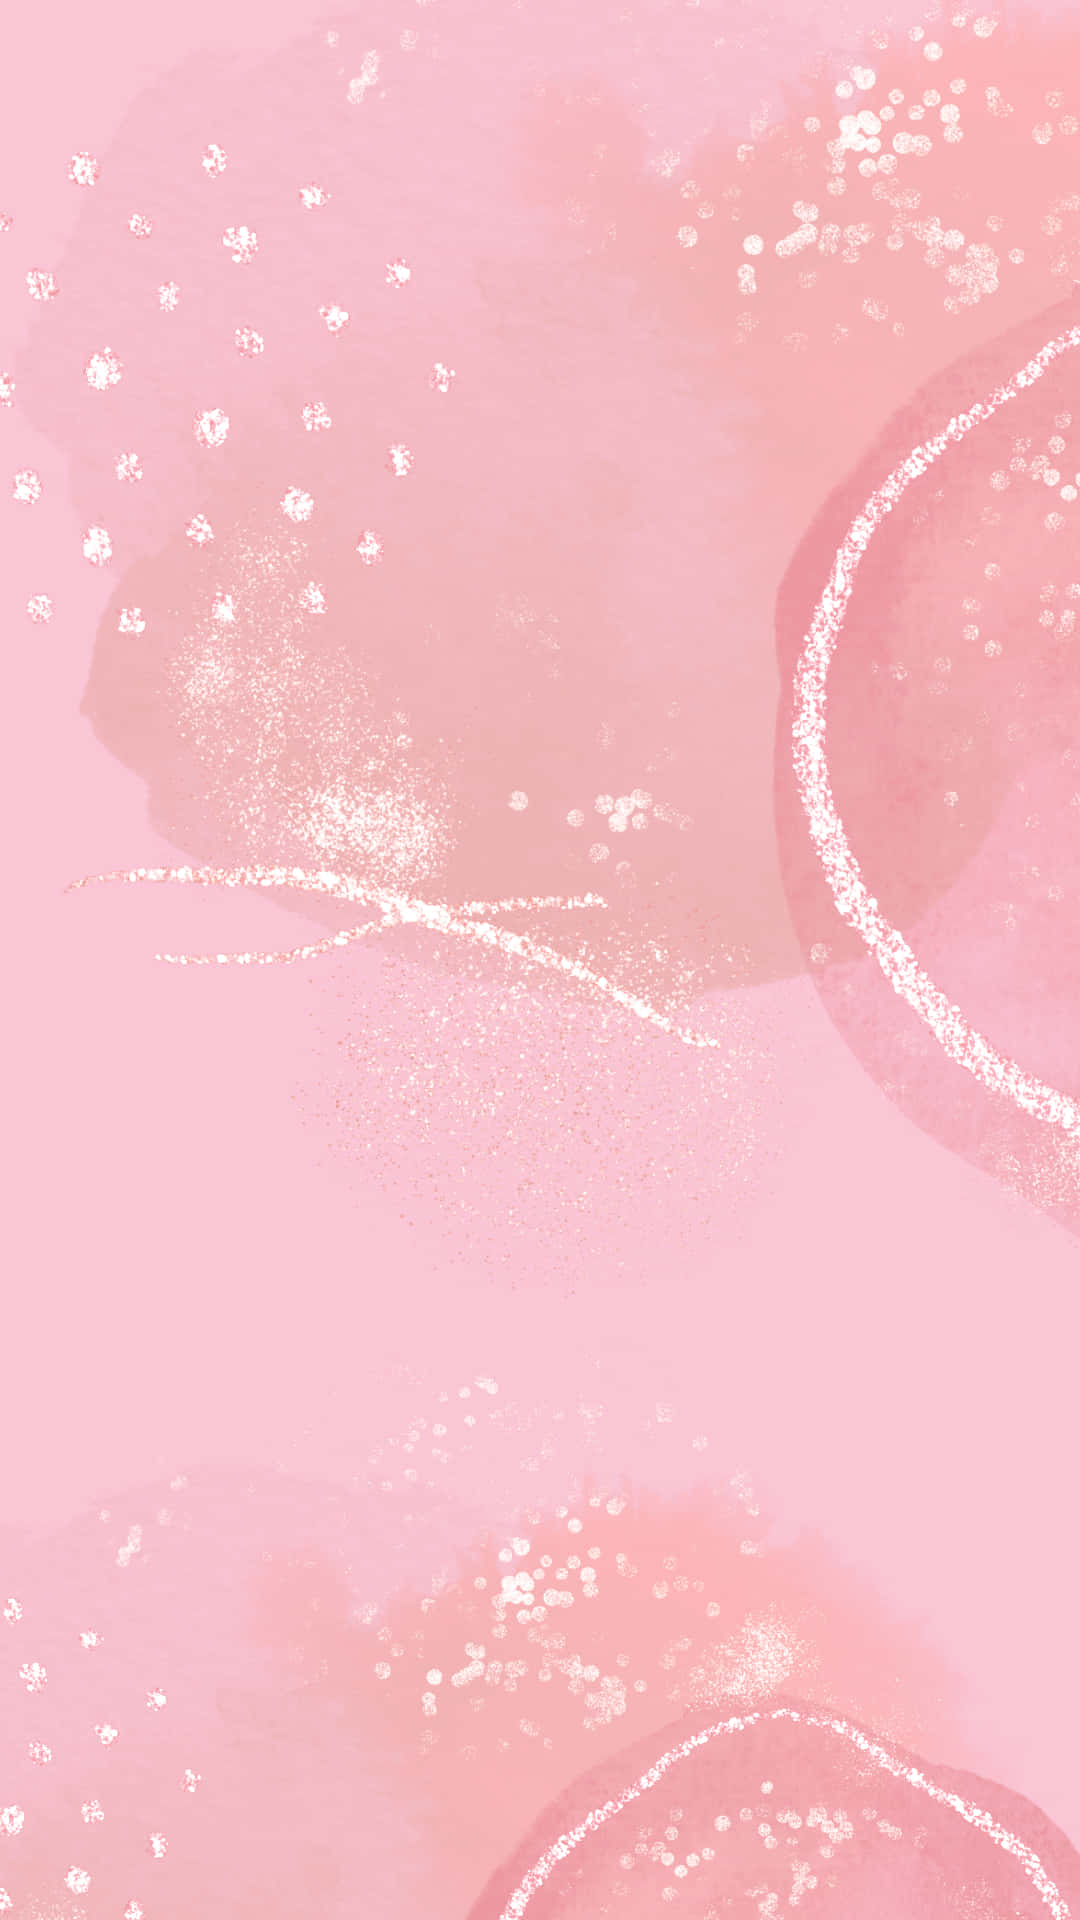 Sure Pink Aesthetic Wallpaper Background